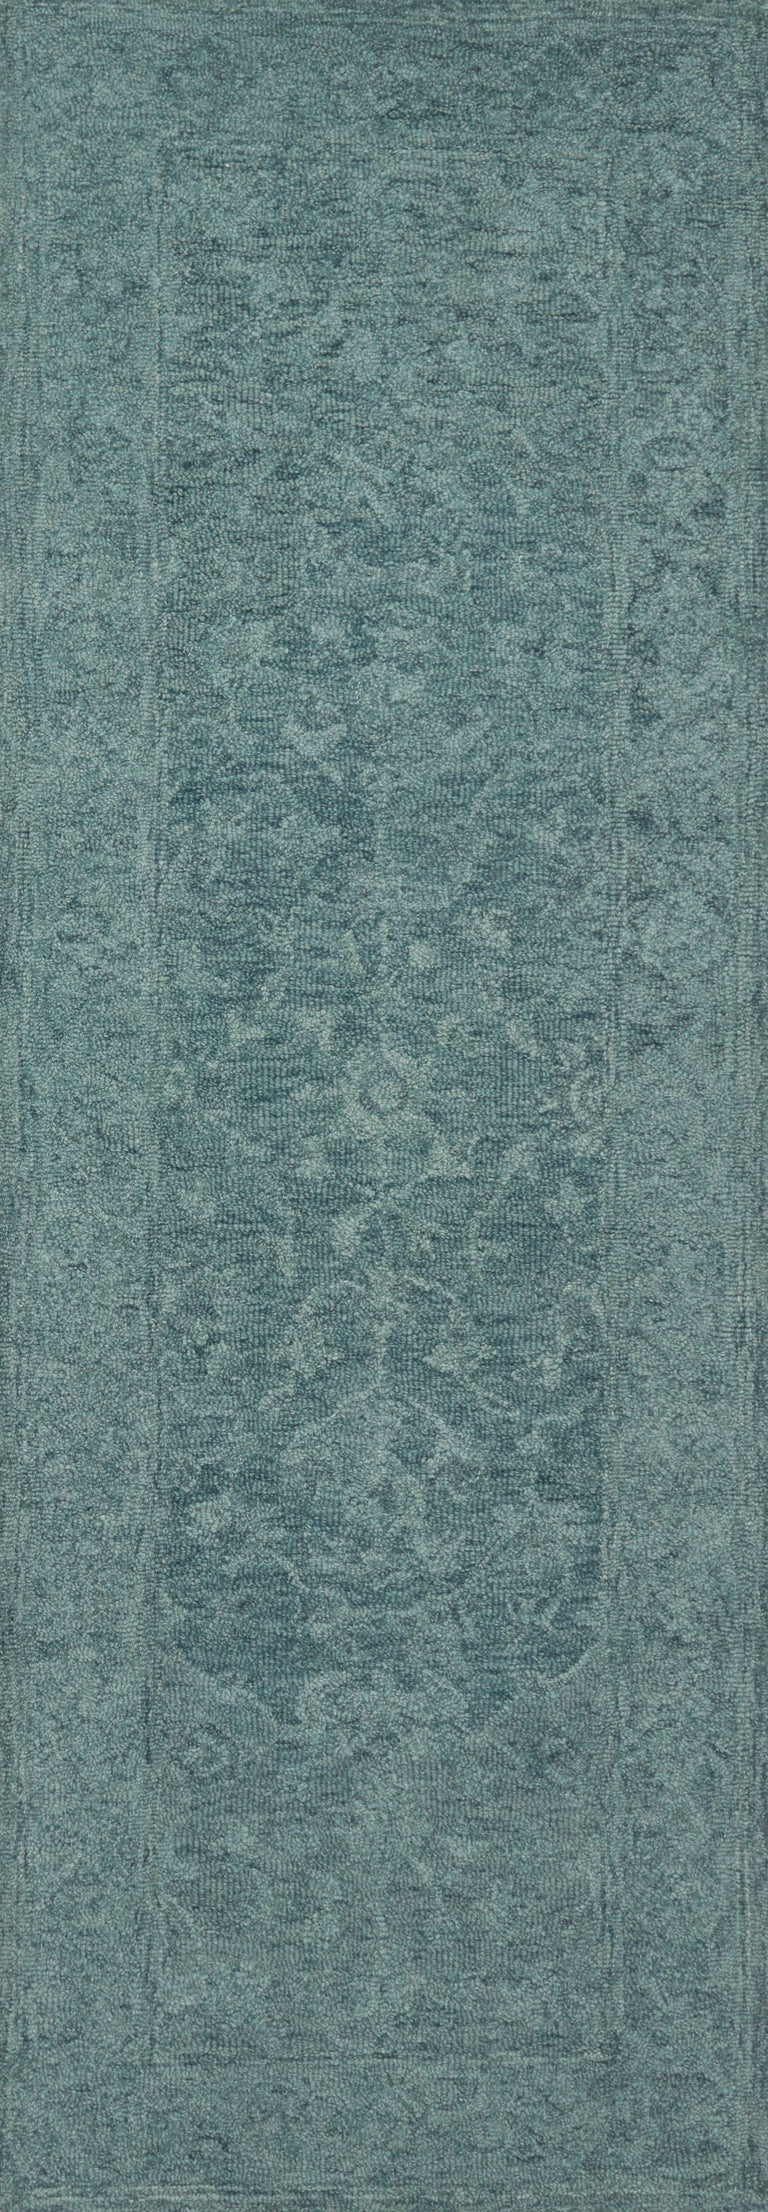 Loloi Rugs Lyle Collection Rug in Teal - 7'9" x 9'9"